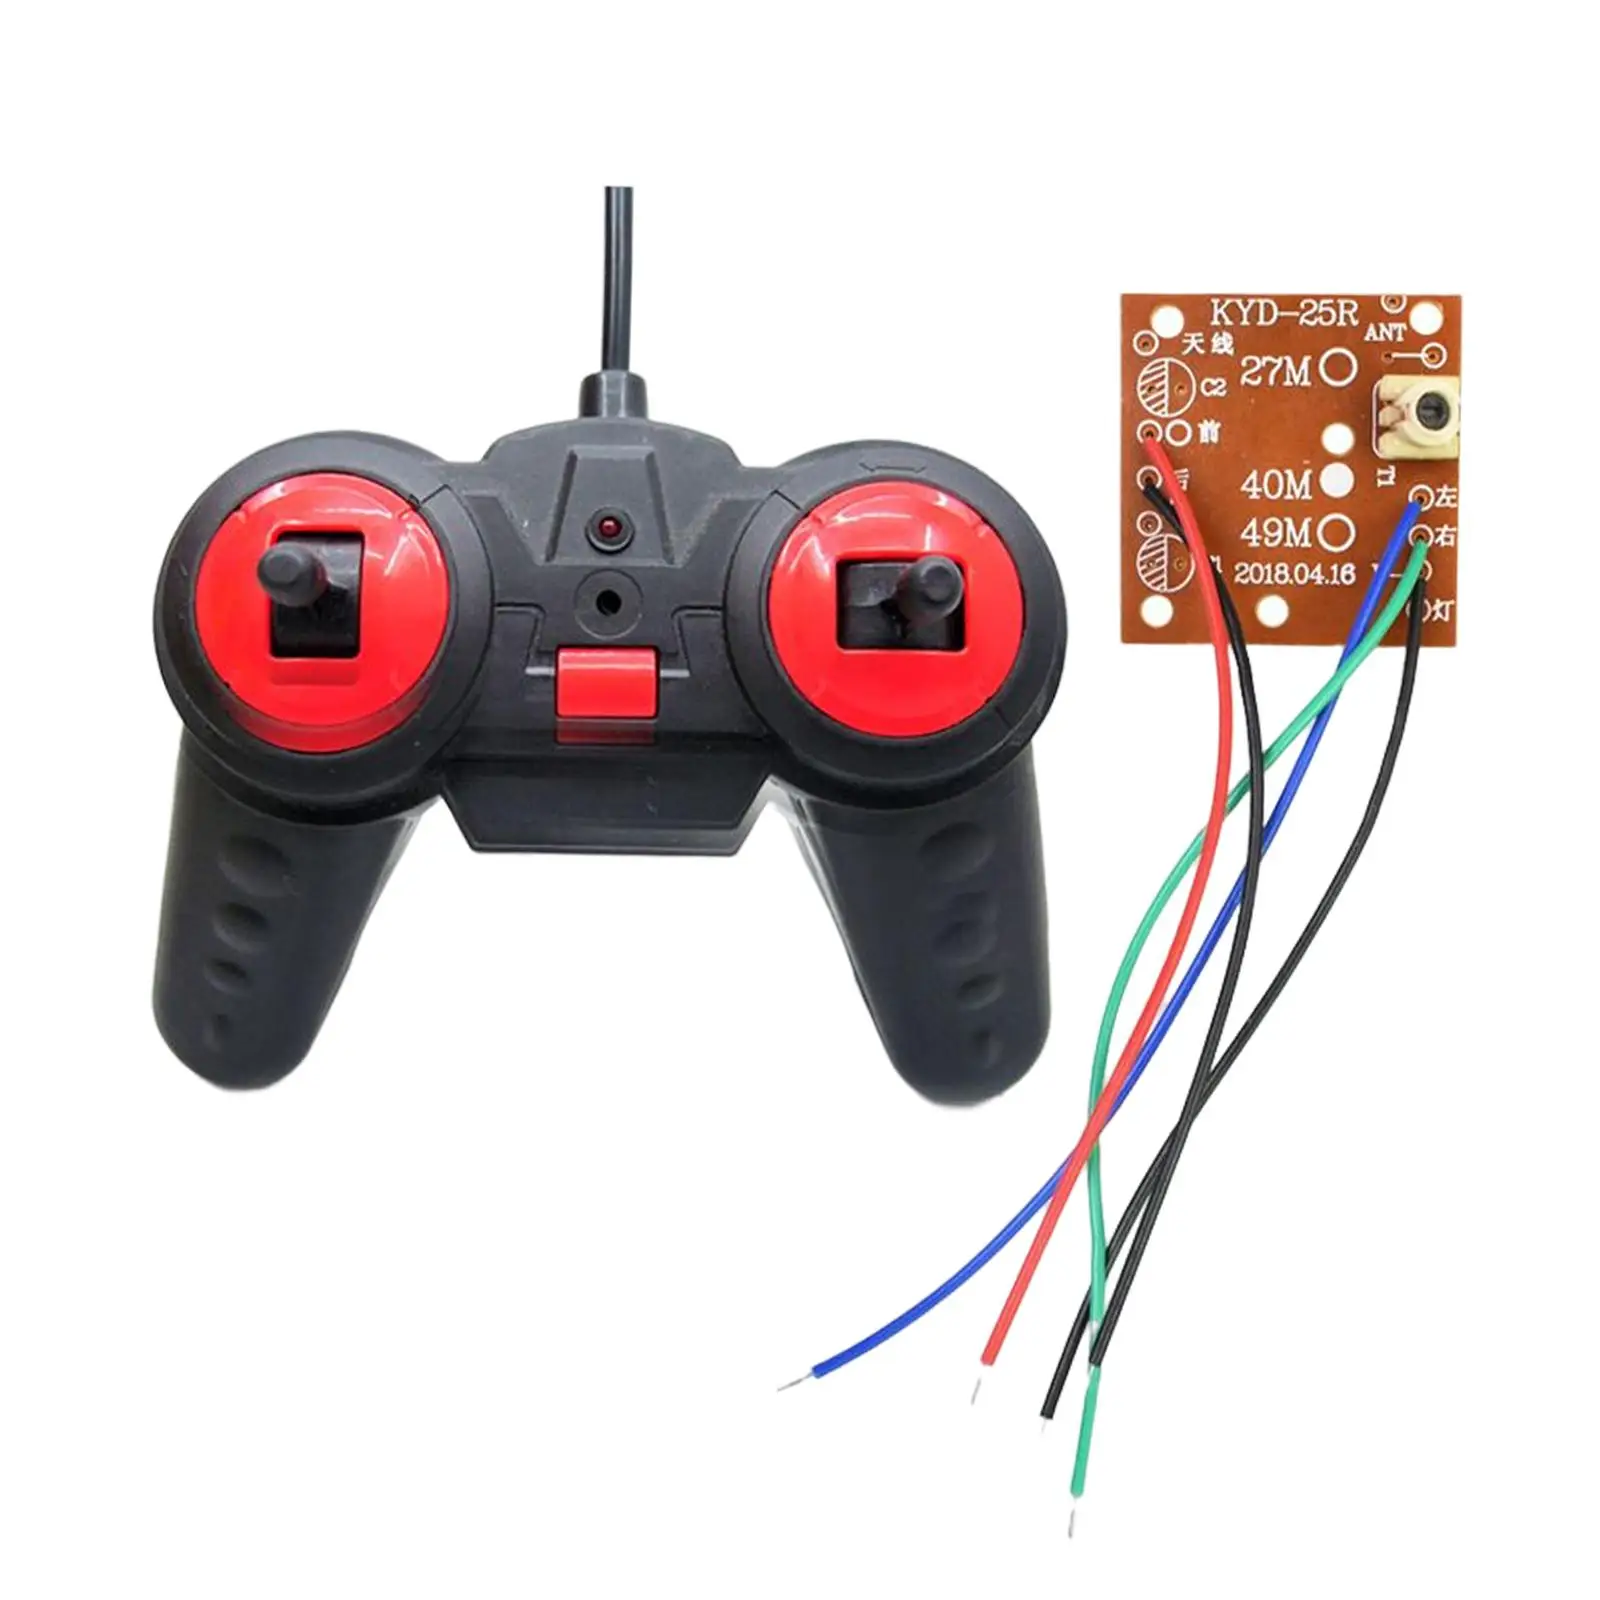 Remote Controller with Receiver Bord for RC Toy RC Replcement Prt Circuit Bord ccessories 27MHz for RC Cr Spre Prts